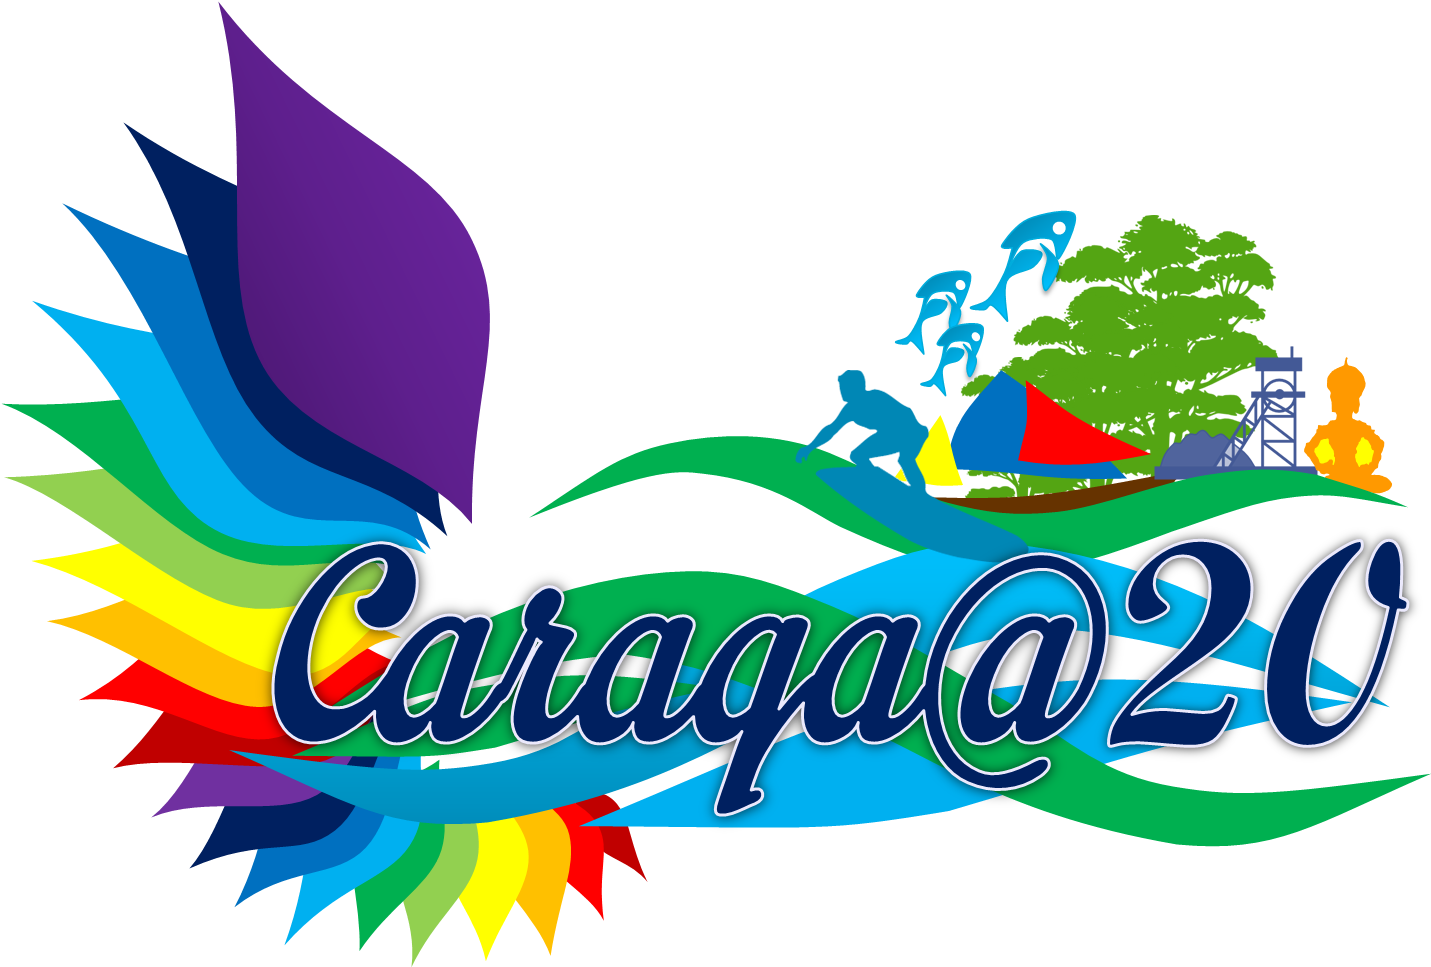 “caraga At 20” Is Symbolized By A Leaf Logo, Which - “caraga At 20” Is Symbolized By A Leaf Logo, Which (1600x968)